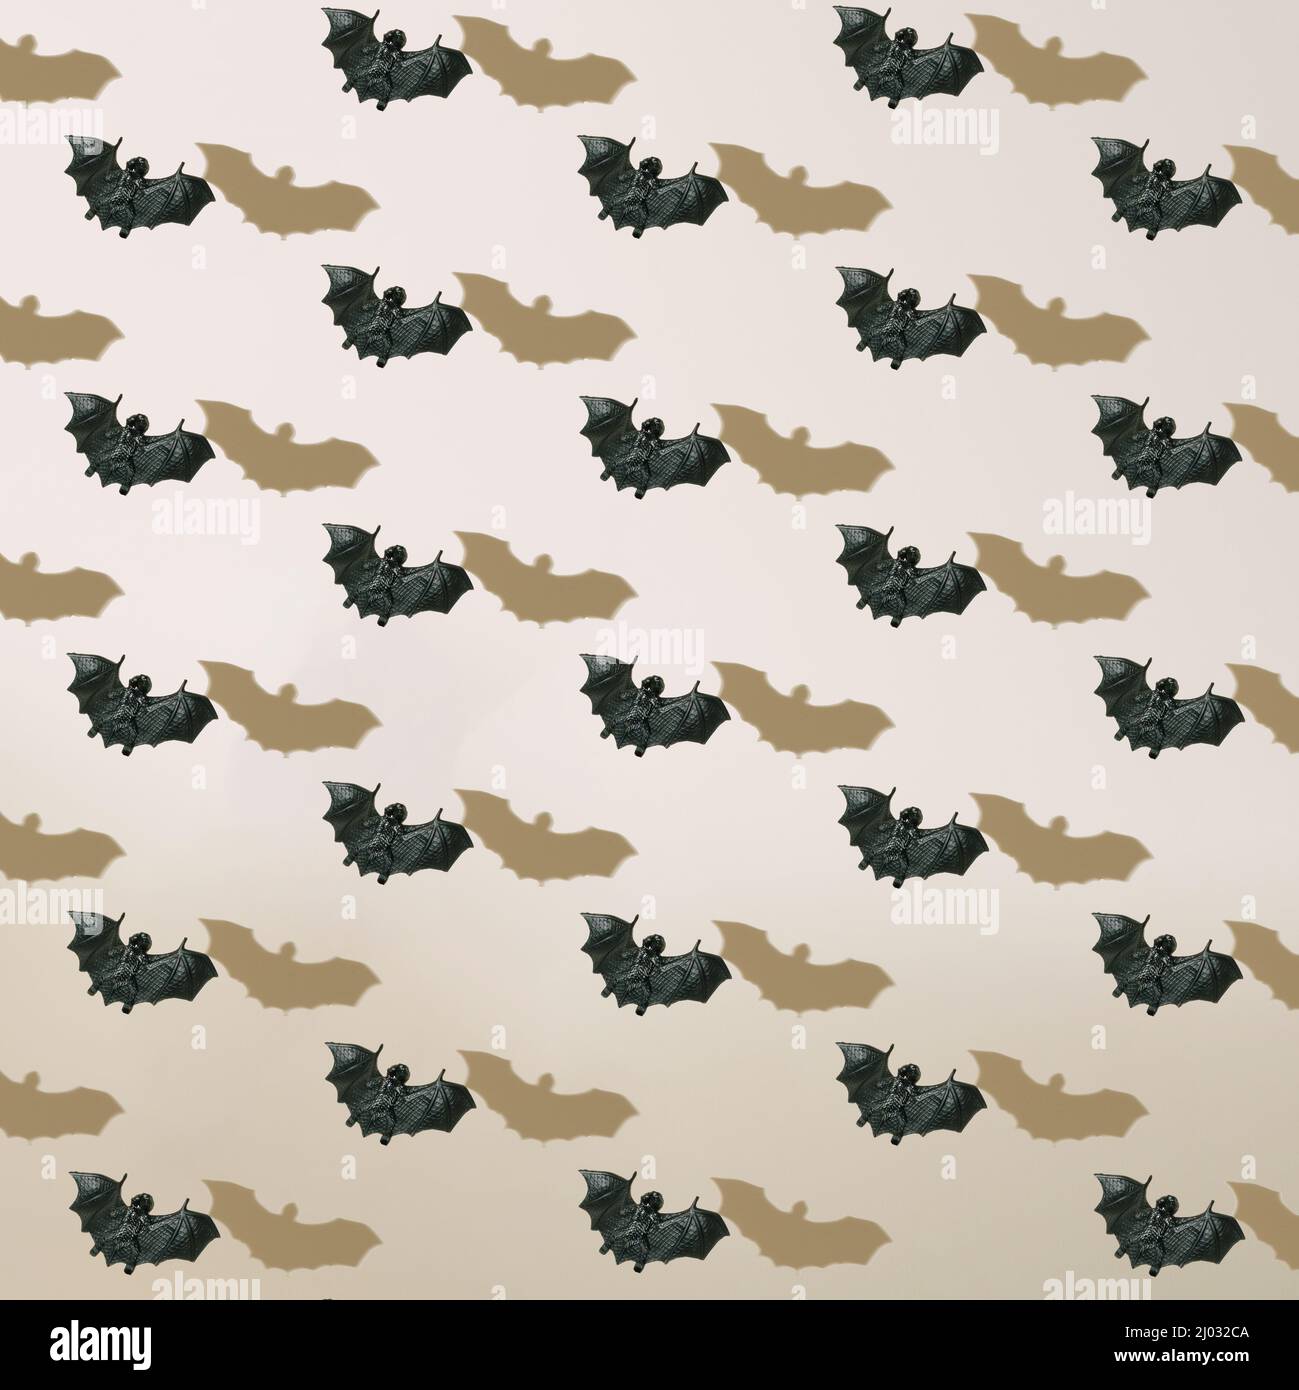 Halloween pattern of black flying bats with shadows on neutral beige background. Stock Photo